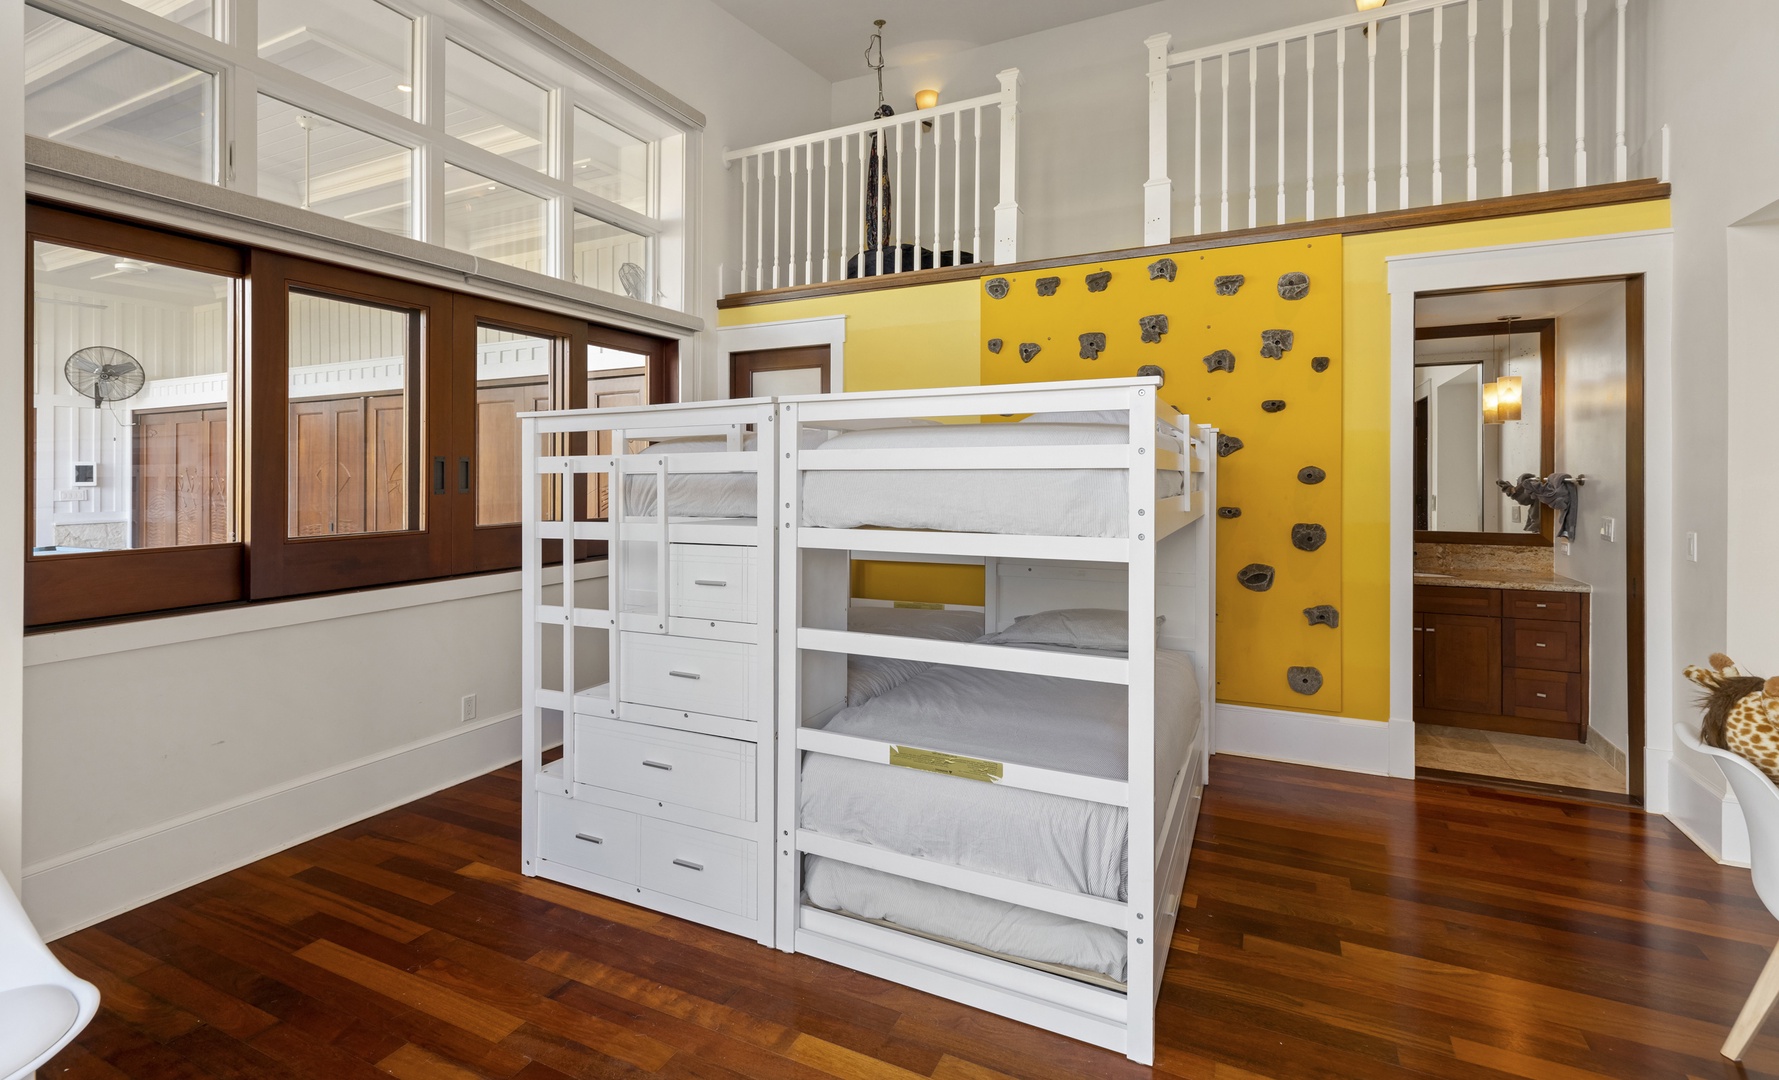 Kailua Vacation Rentals, Lanikai Villa - Guest Bedroom 4 with two twins and two doubles - A perfect space for the kids!